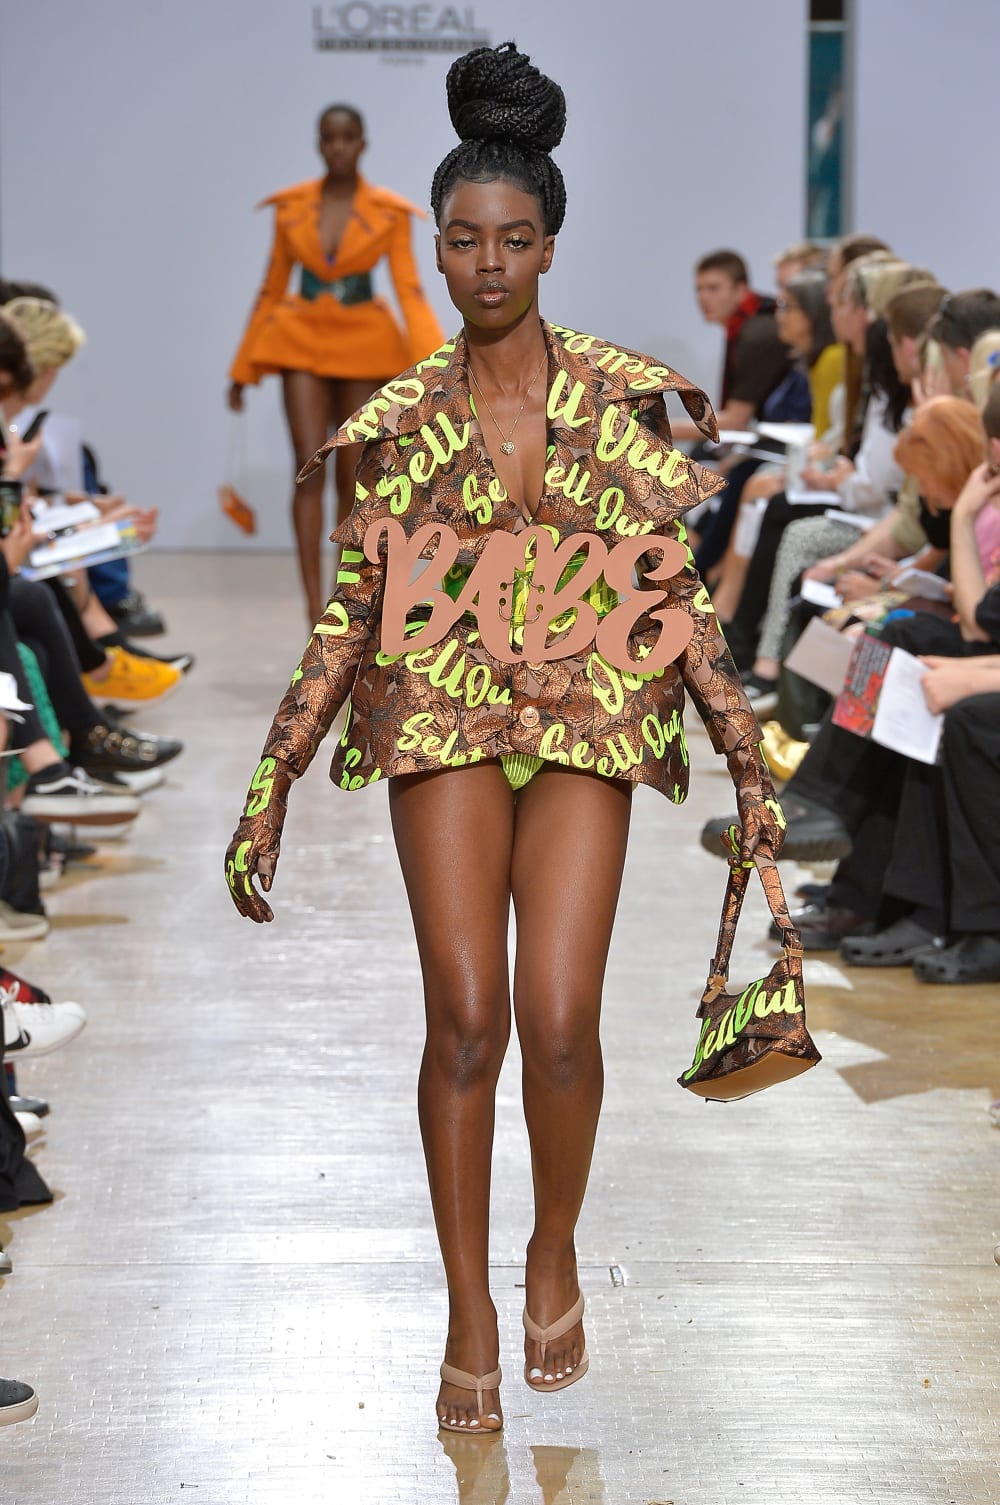 BA Fashion Show 2019: In Pictures | Central Saint Martins